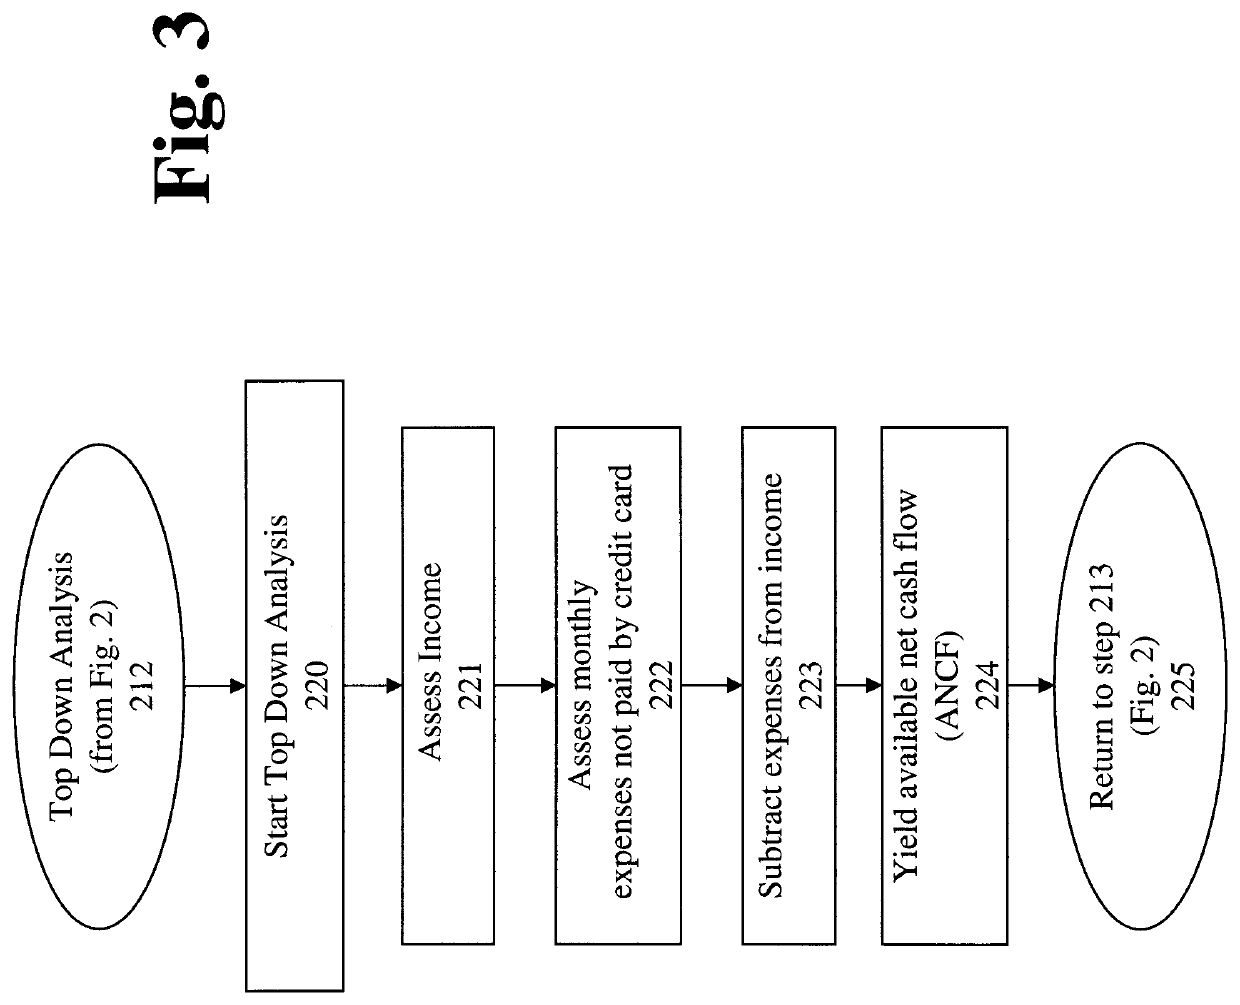 Systems and methods for identifying and capturing potential bankcard spending